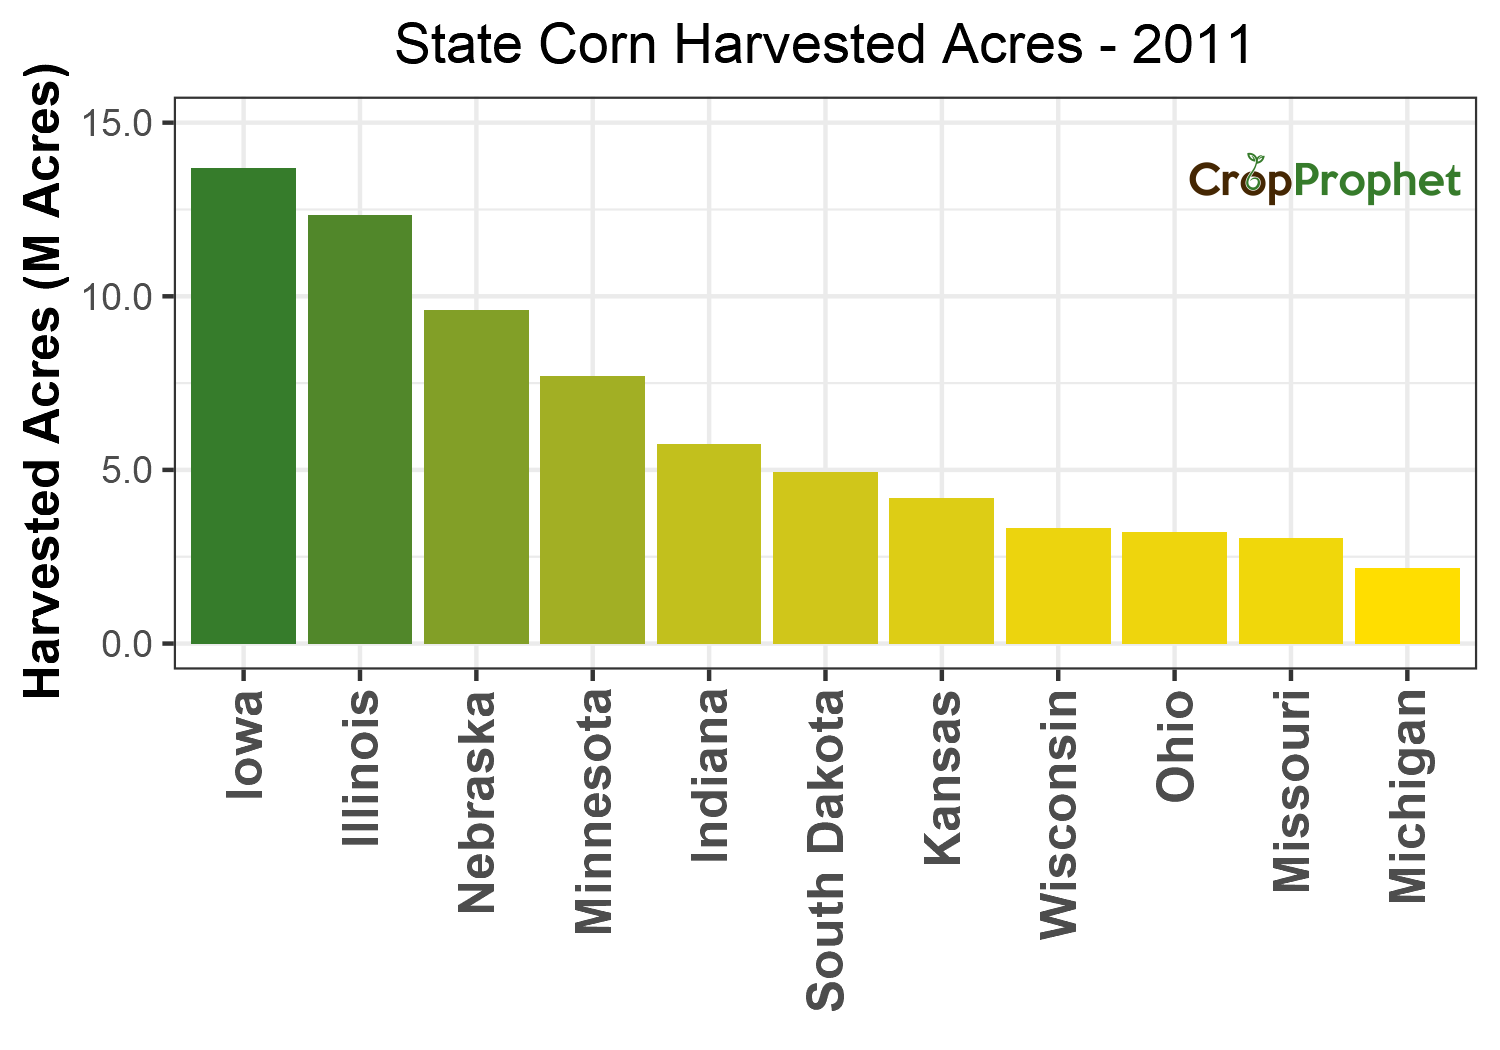 Corn Harvested Acres by State - 2011 Rankings